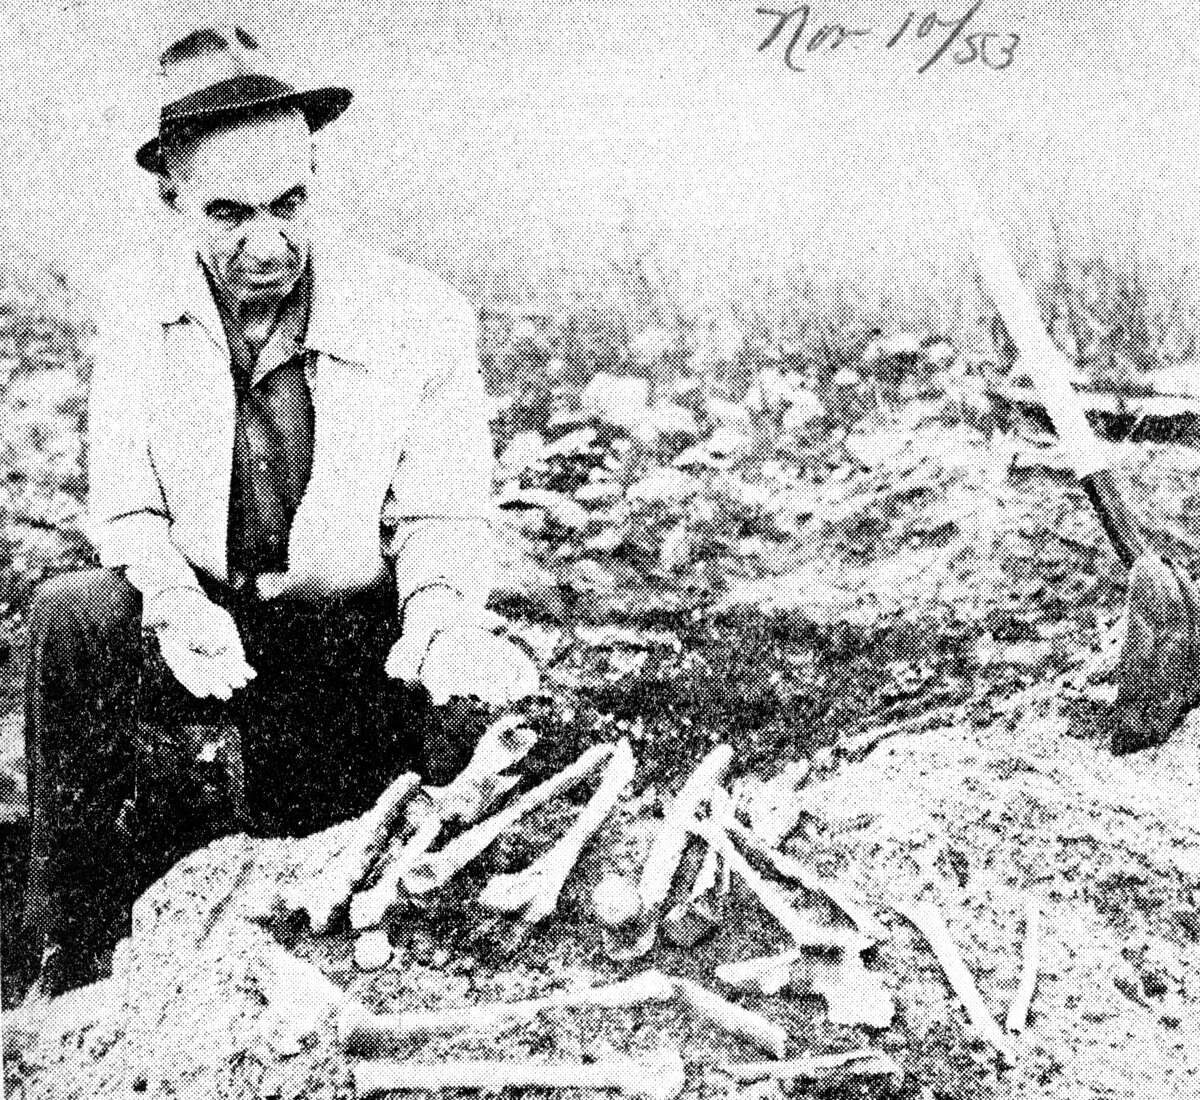 Sheriff Harry Holmgren shows some of the nearly 40 human bones unearthed on the Louis Sands property, just off Ashland Street, at East River Street. The photo accompanied an article that was published in the News Advocate on November 10, 1953.